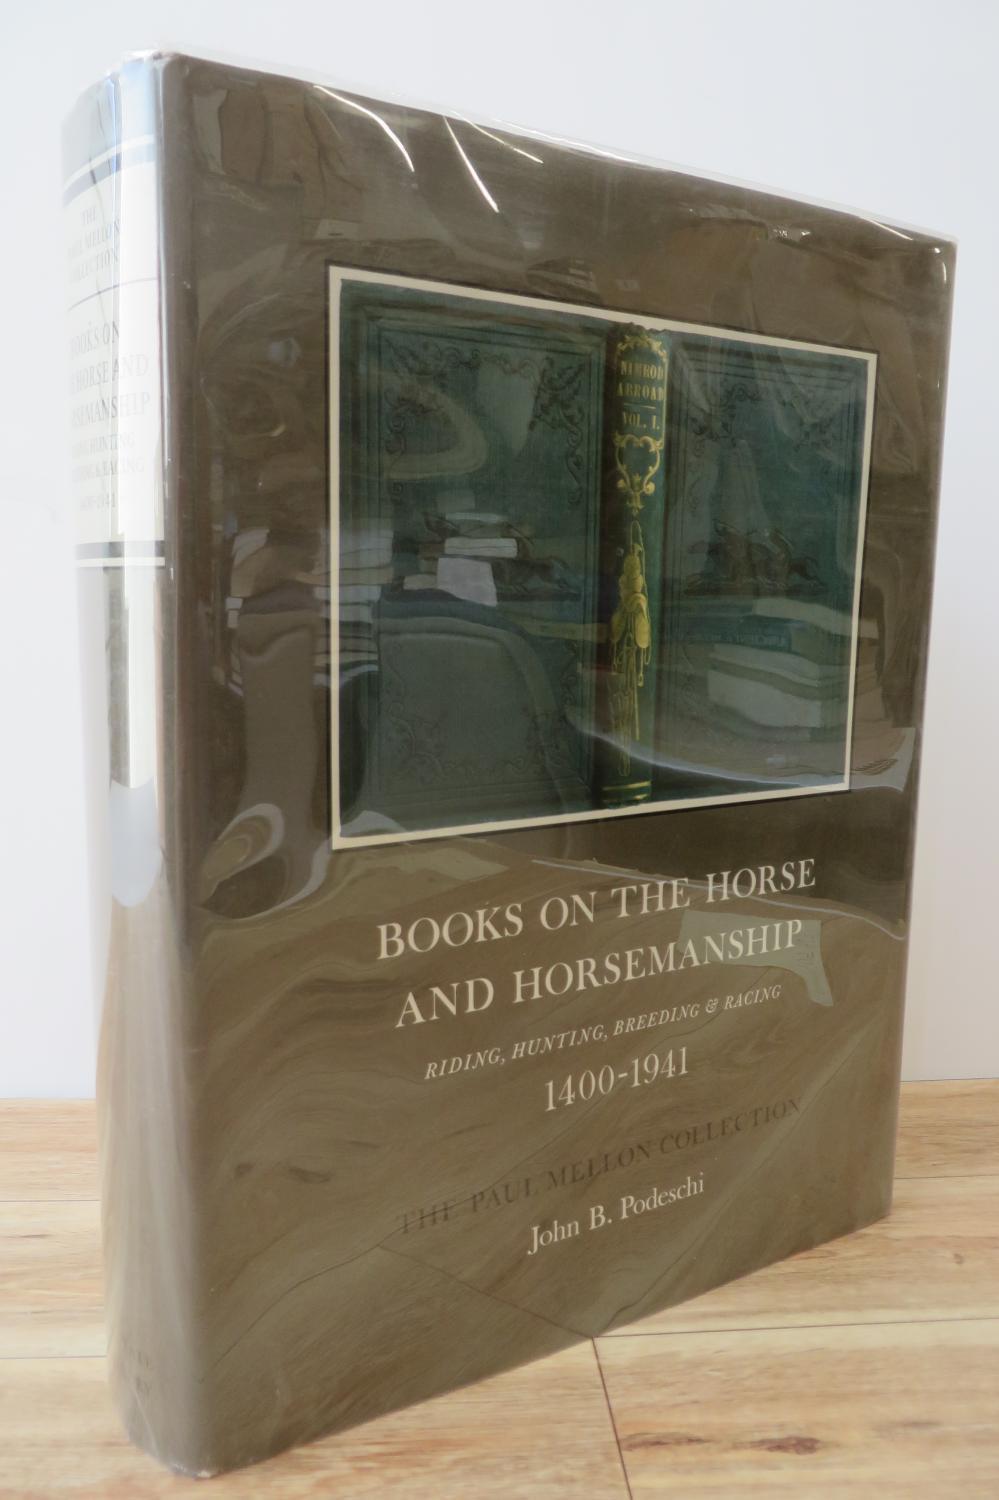 Books on the Horse and Horsemanship: Riding, Hunting, Breeding, & Racing 1400-1941. The Paul Mellon Collection